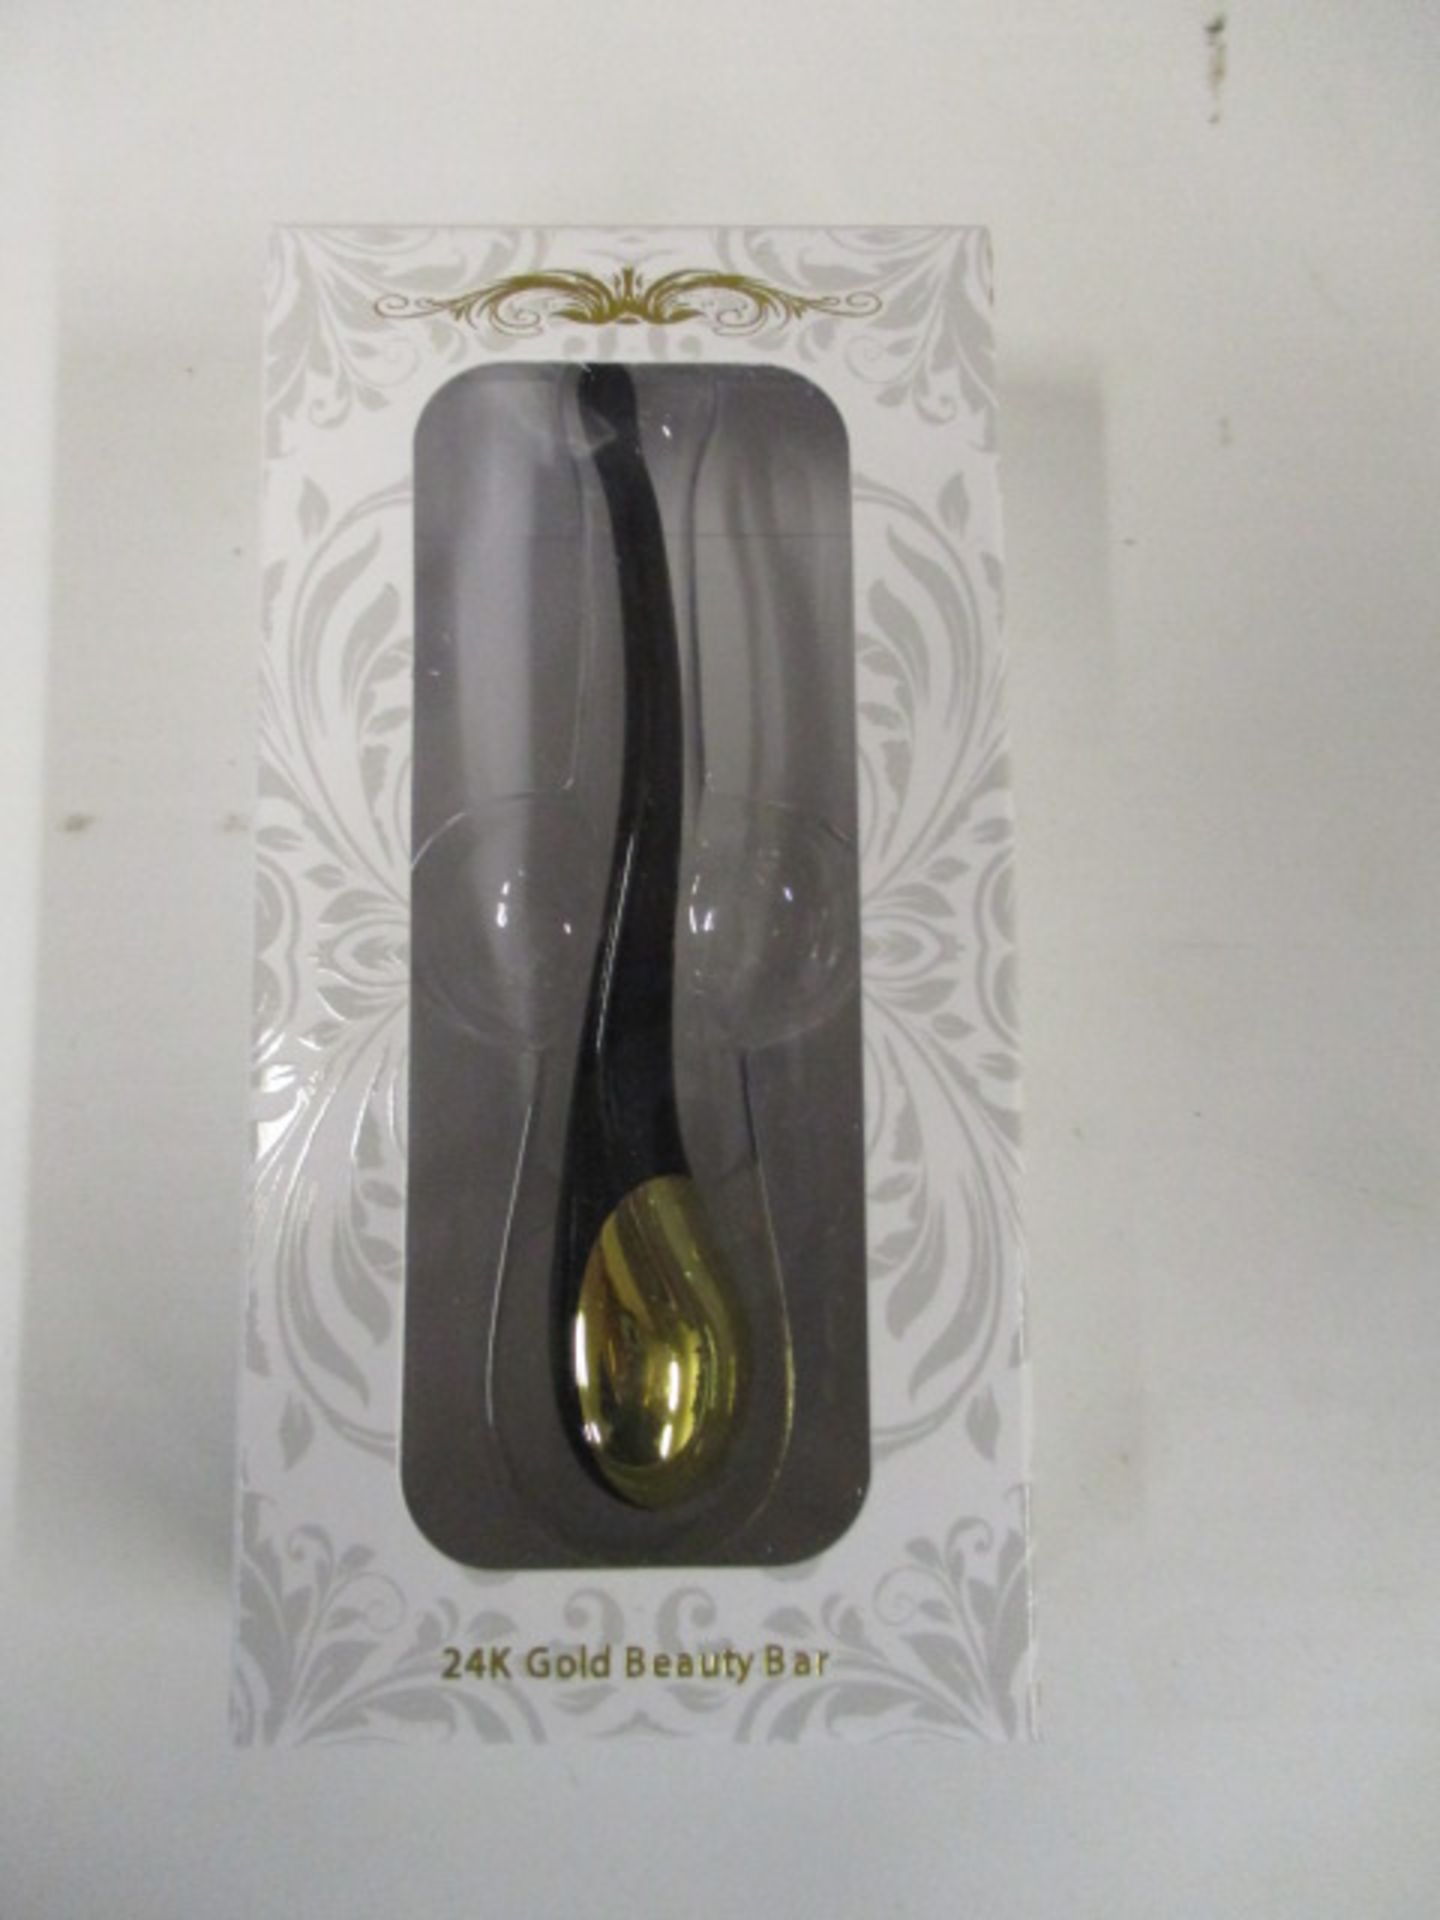 Cougar by Paula Dunne 24K Gold Beauty Bar. RRP £75 new & packaged The 24 Carat Gold applicator